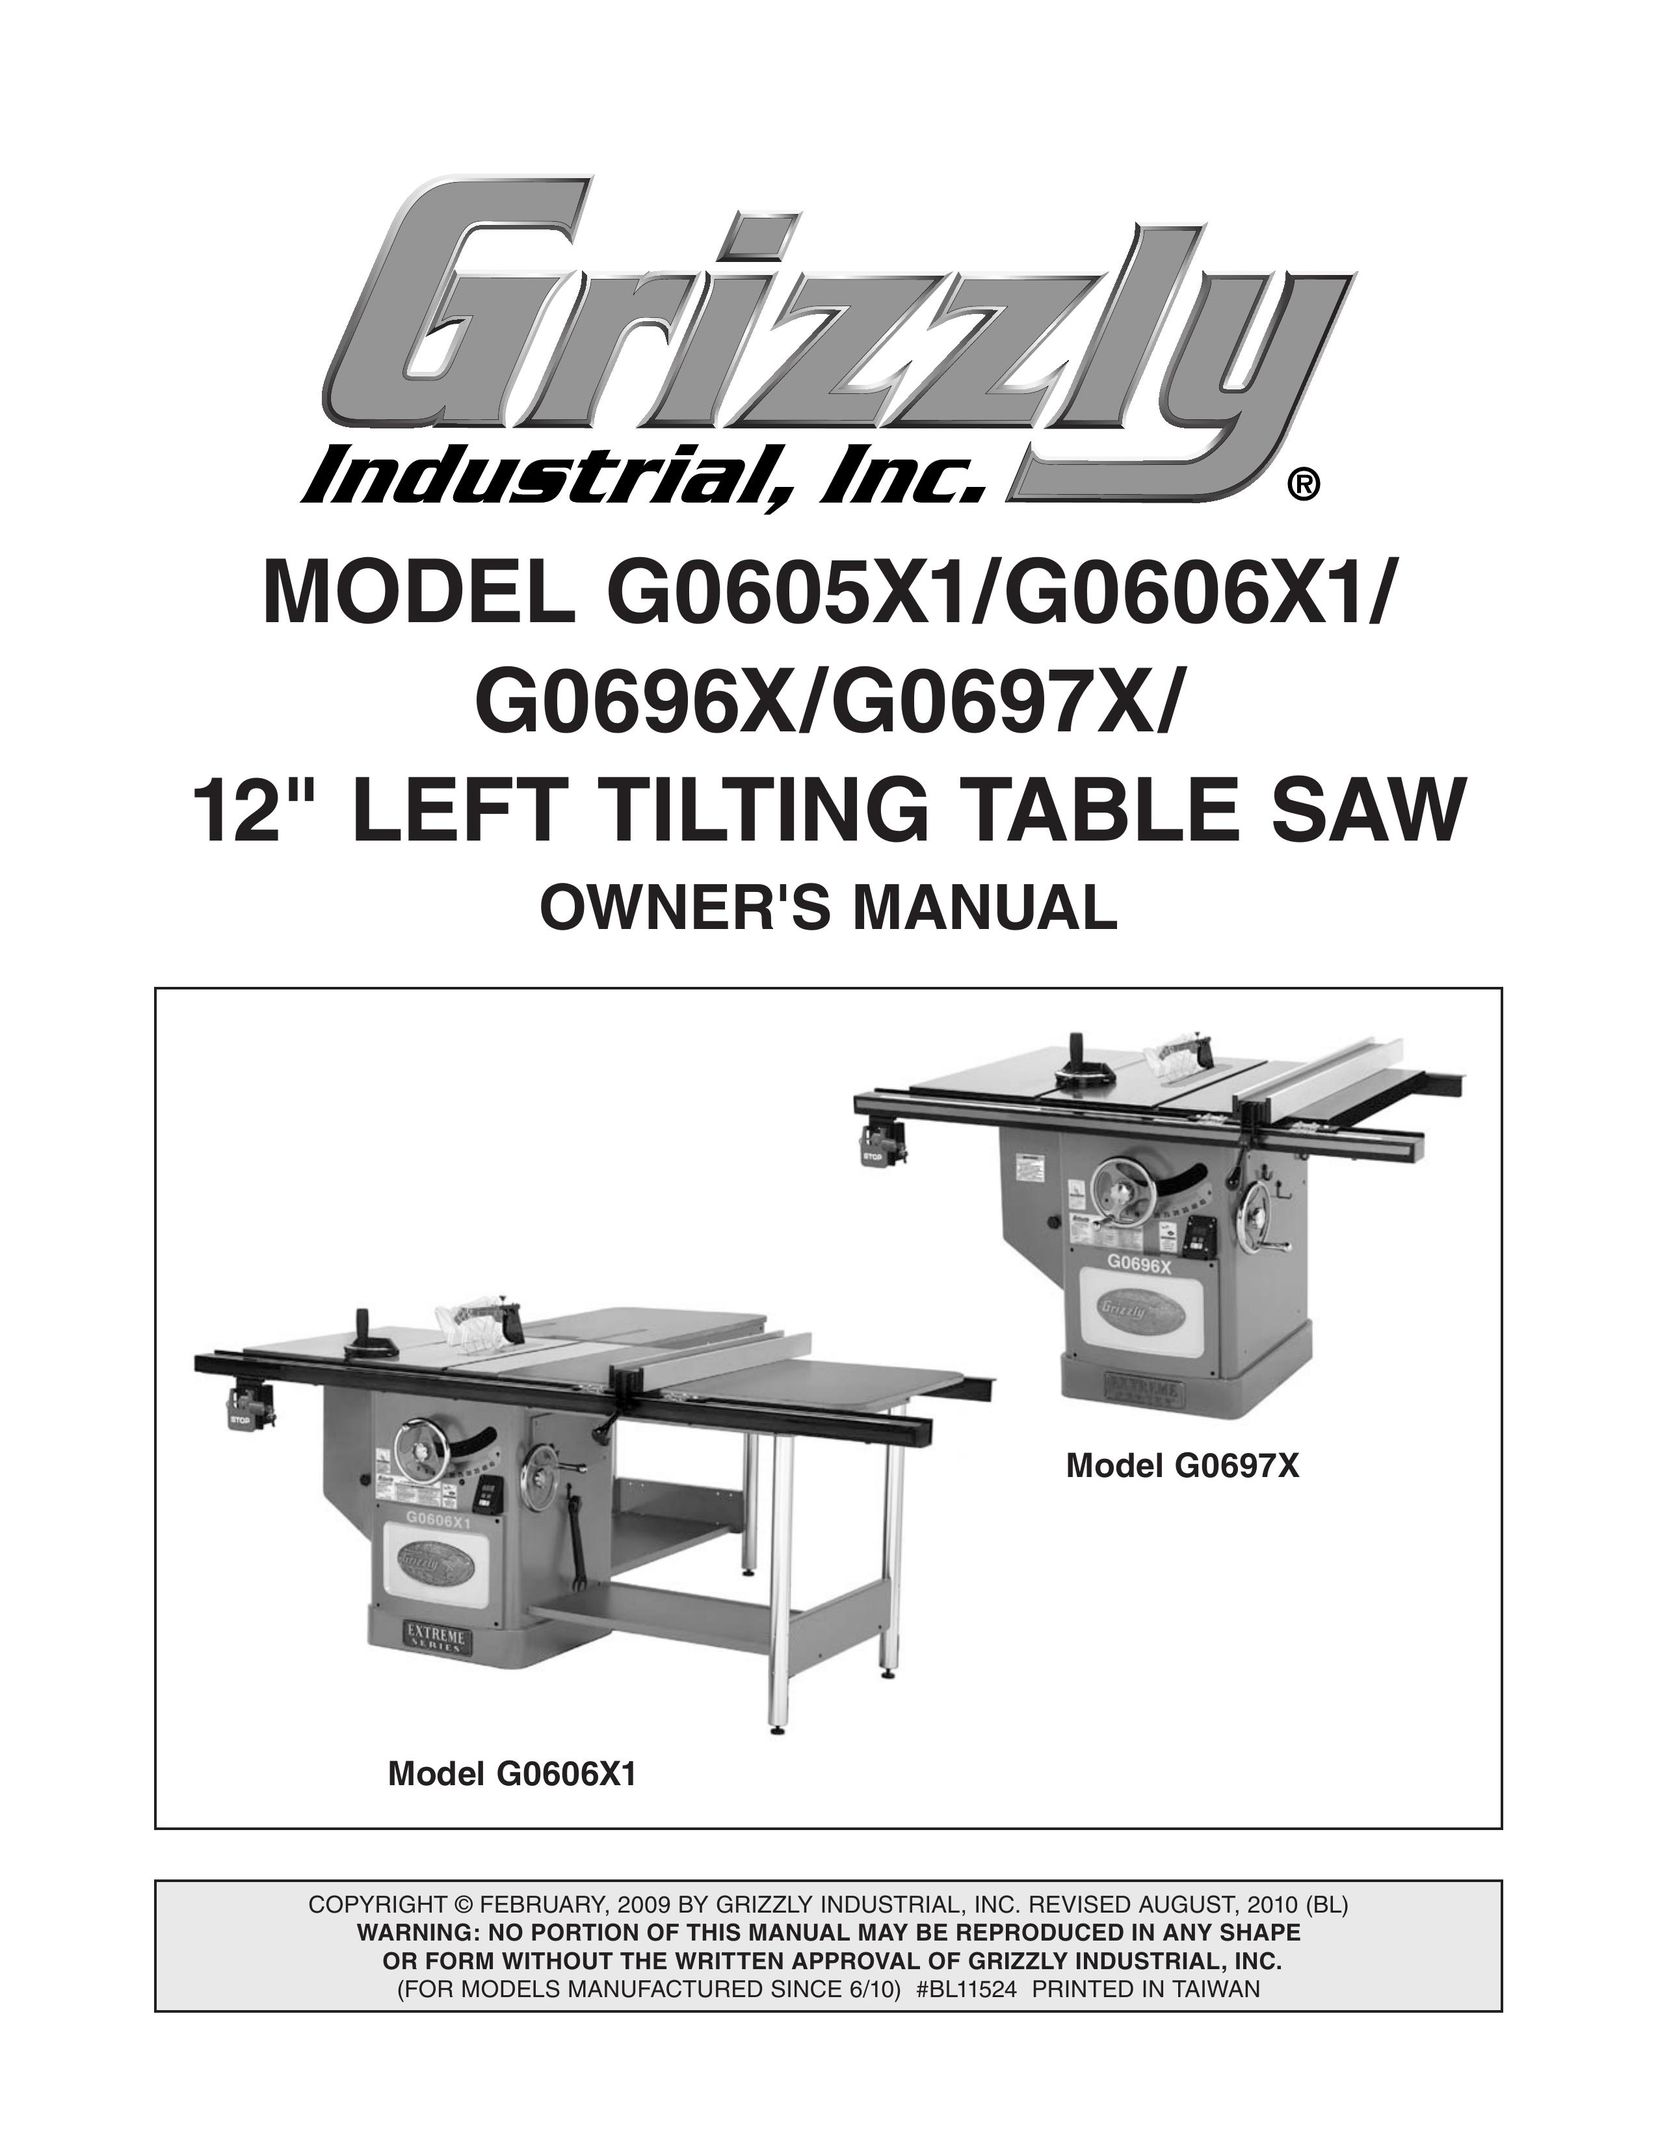 Grizzly G0697X Paint Sprayer User Manual